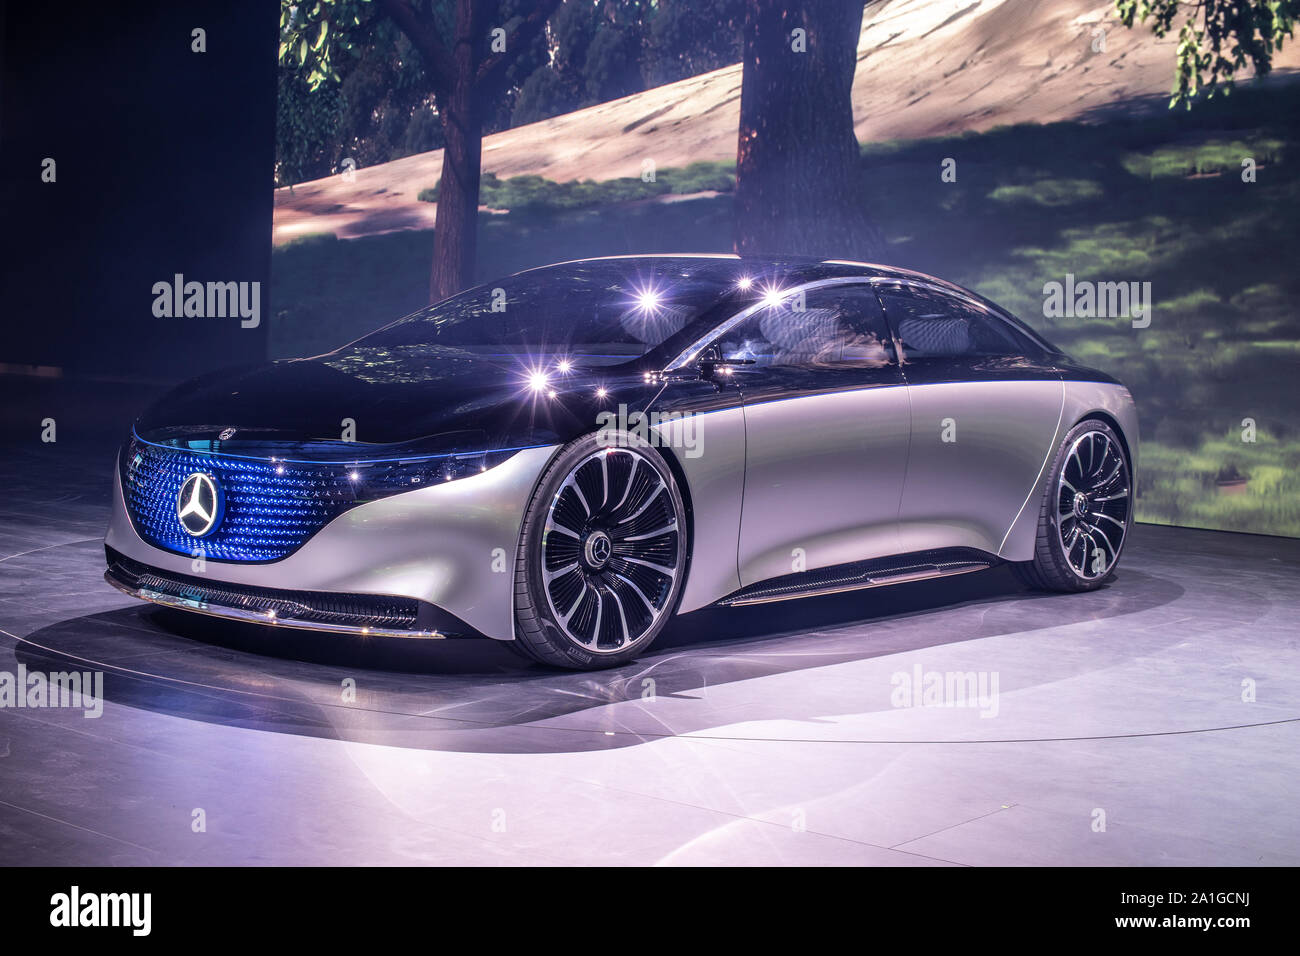 Frankfurt Germany Sep 2019 Show Car Mercedes Benz Eqs Concept At Iaa Vision Electric S Class Prototype Of Future Car Created By Mercedes Benz Stock Photo Alamy